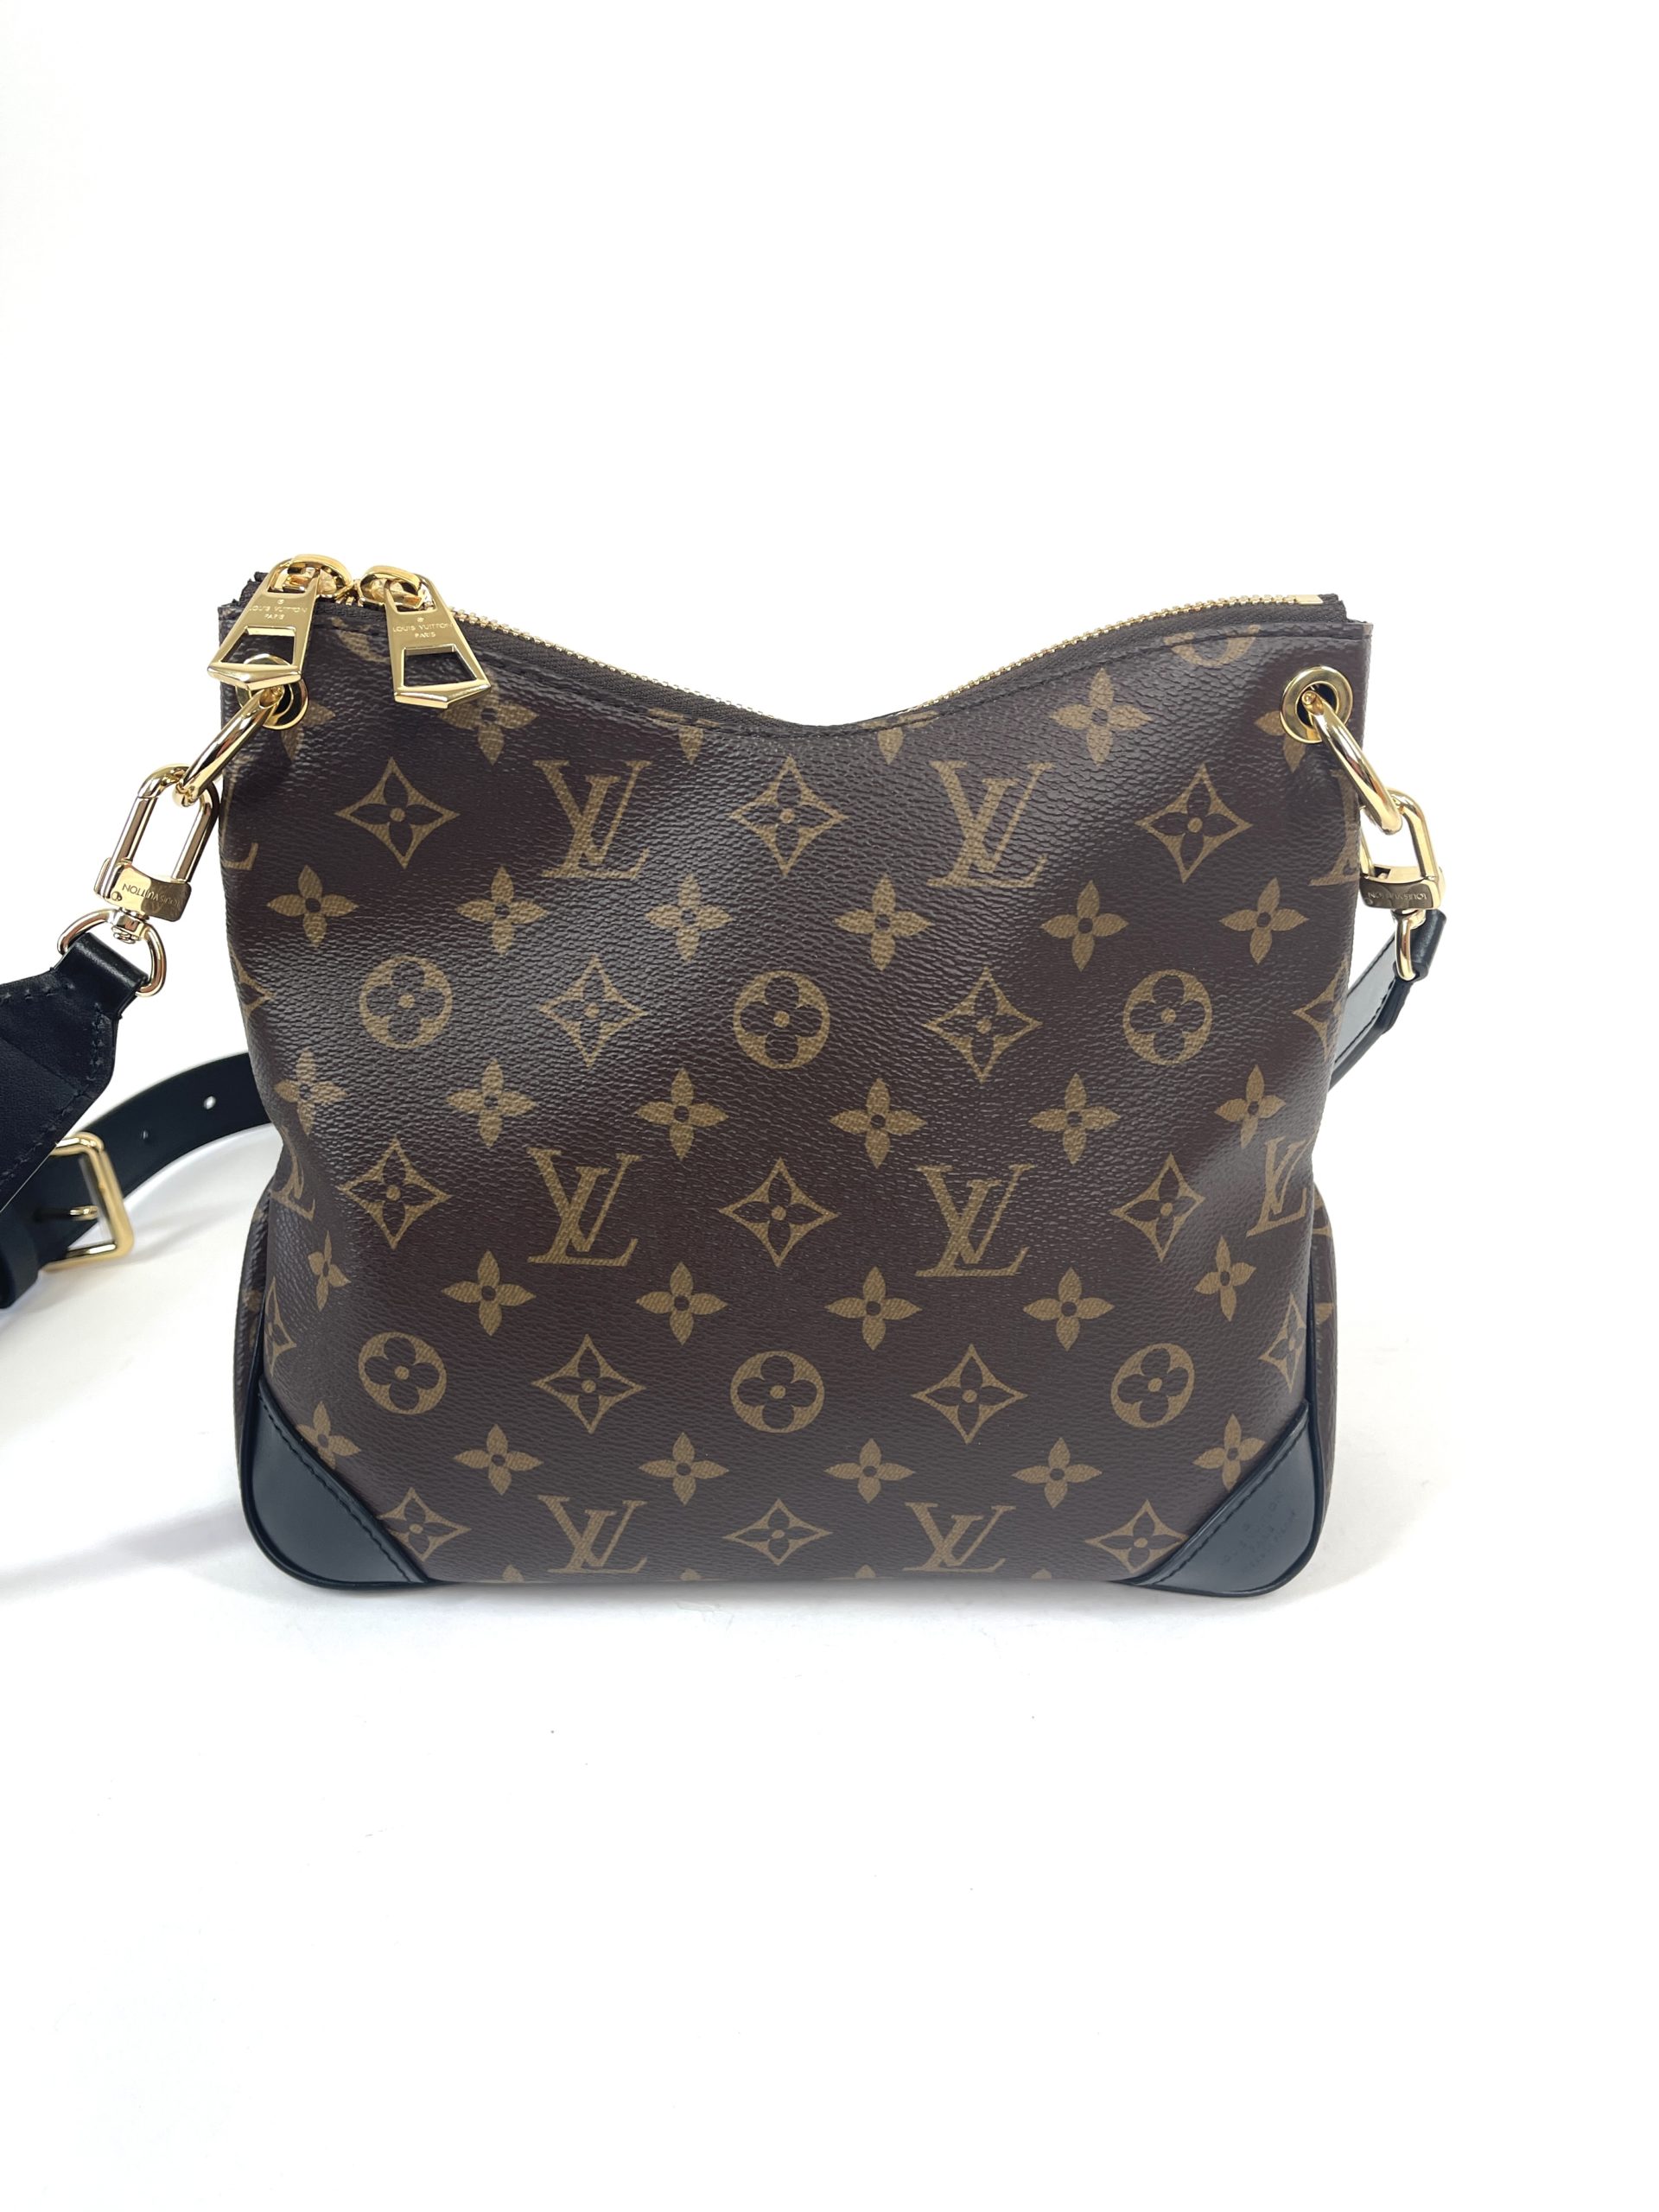 LV Odeon PM Crossbody Bag Review & Outfit Styling Video on